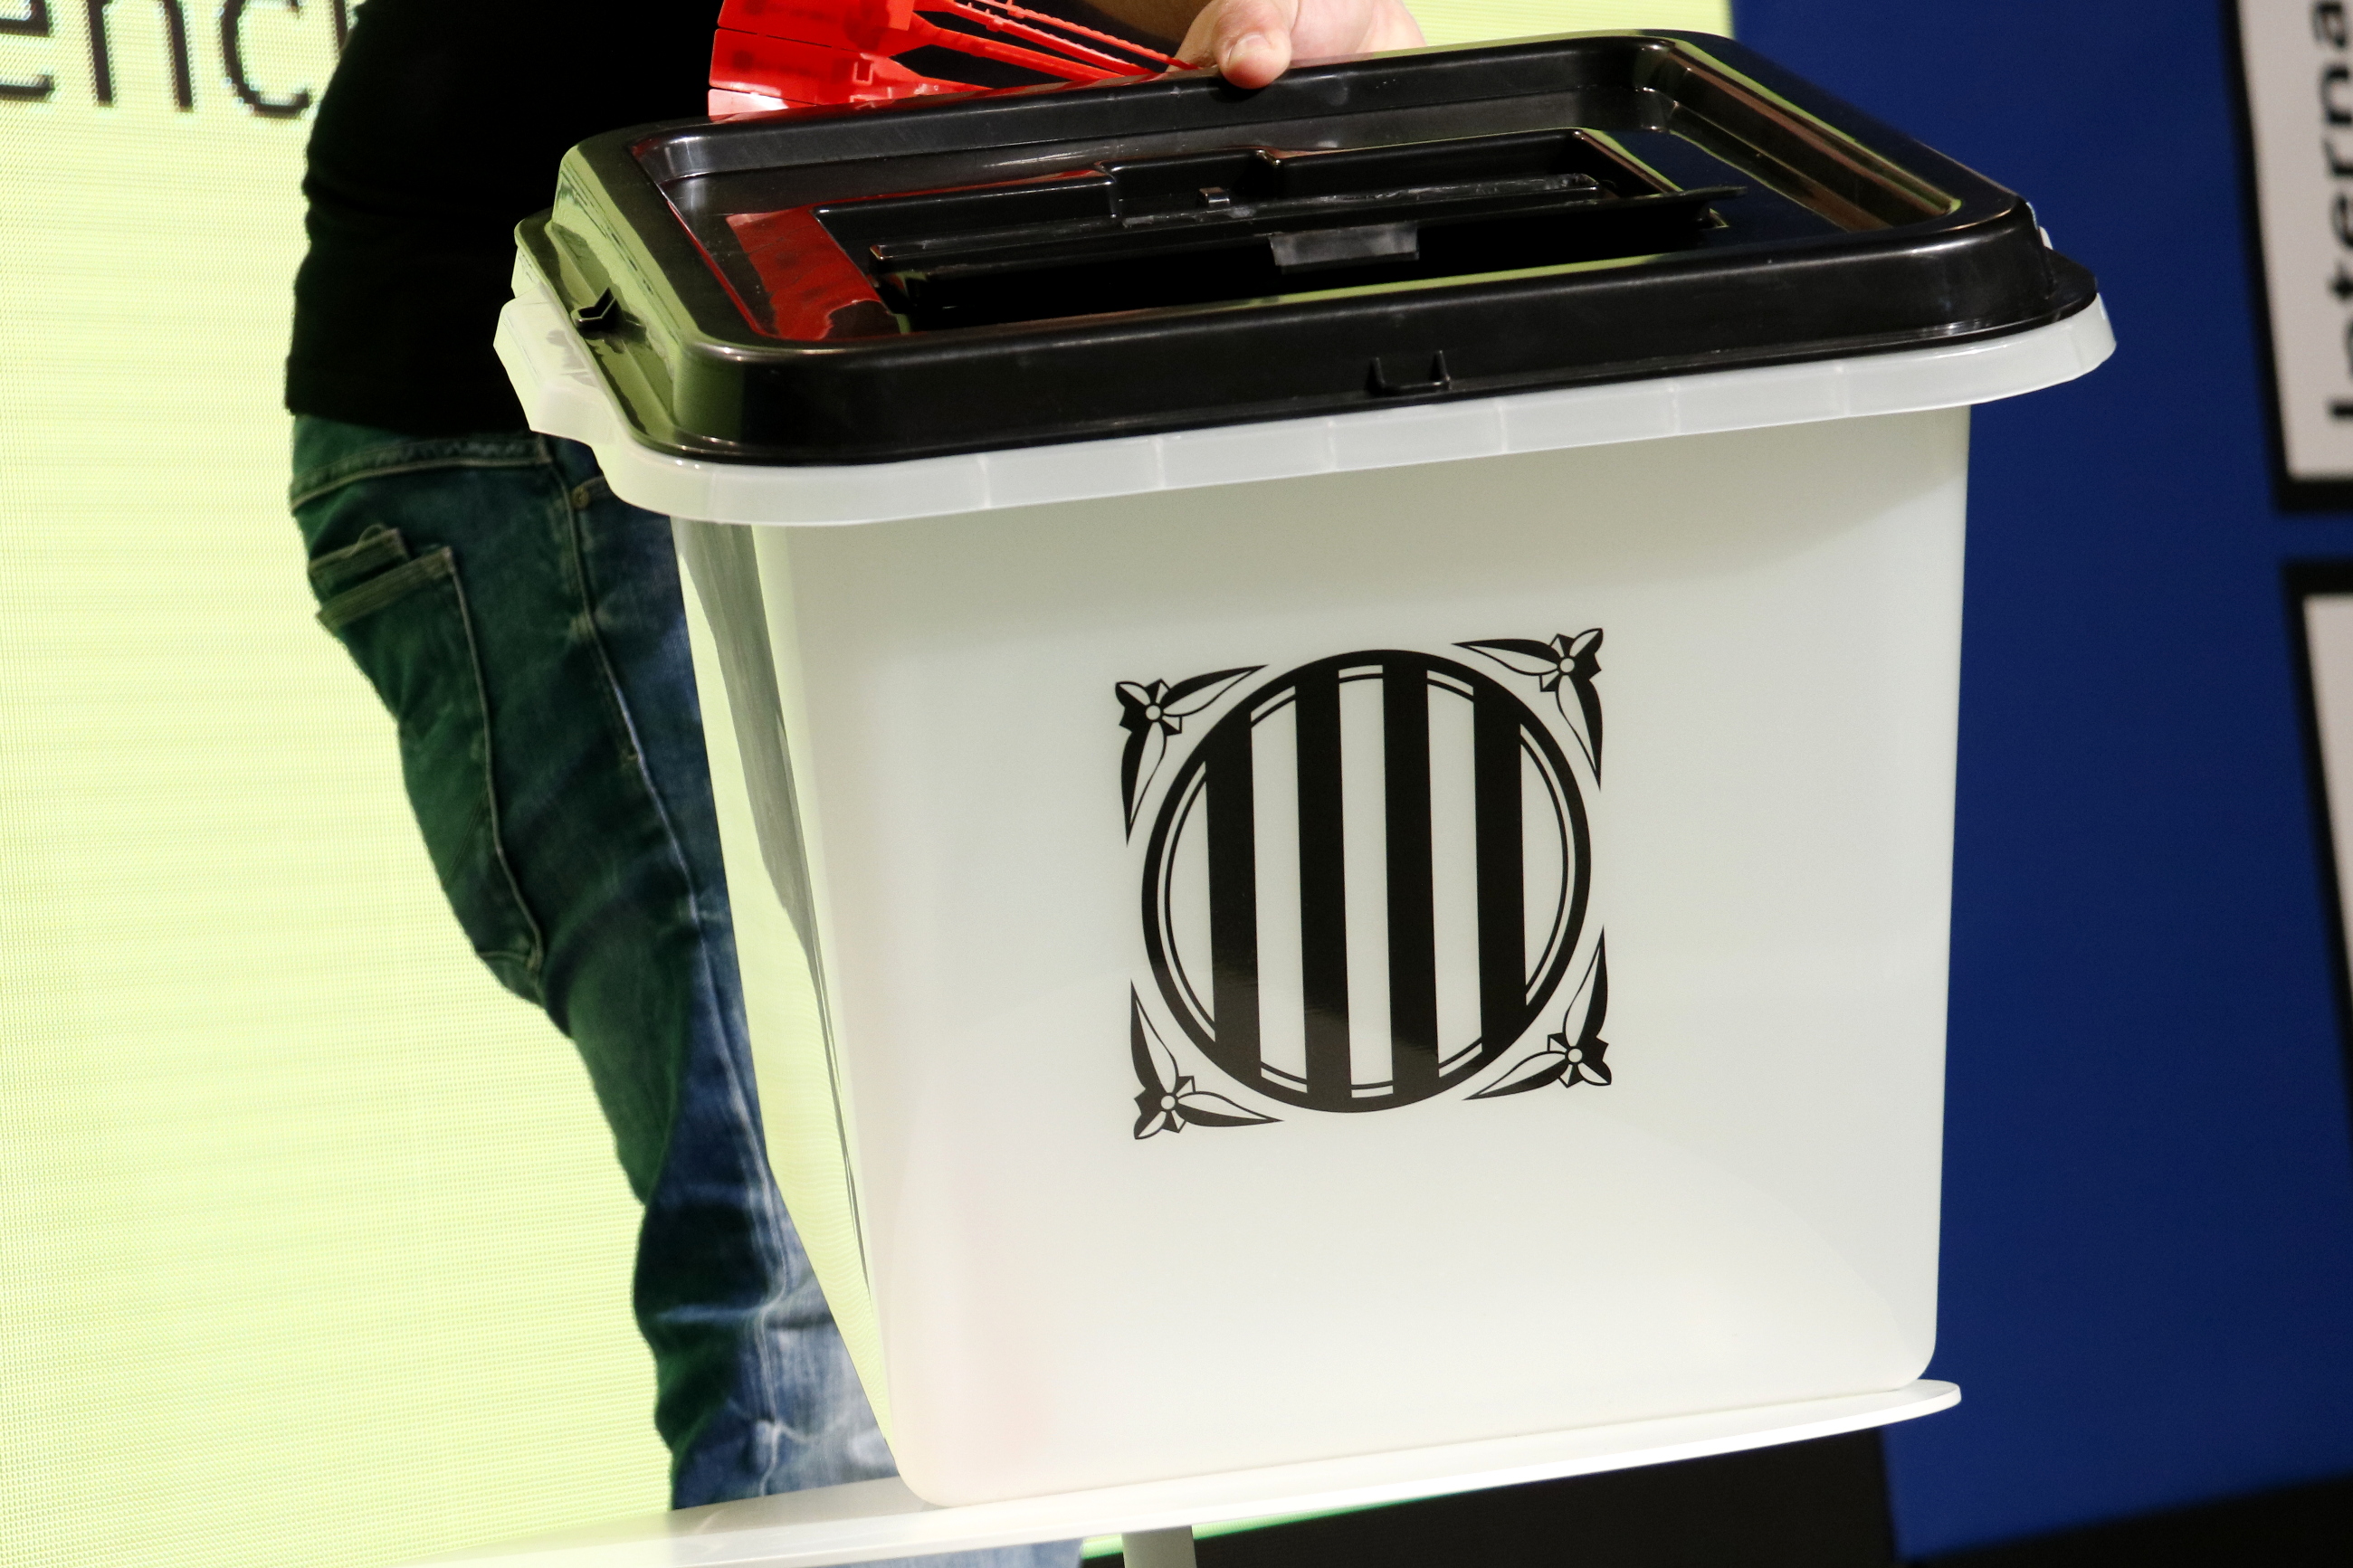 The ballot box of the Catalan independence referendum (by ACN)